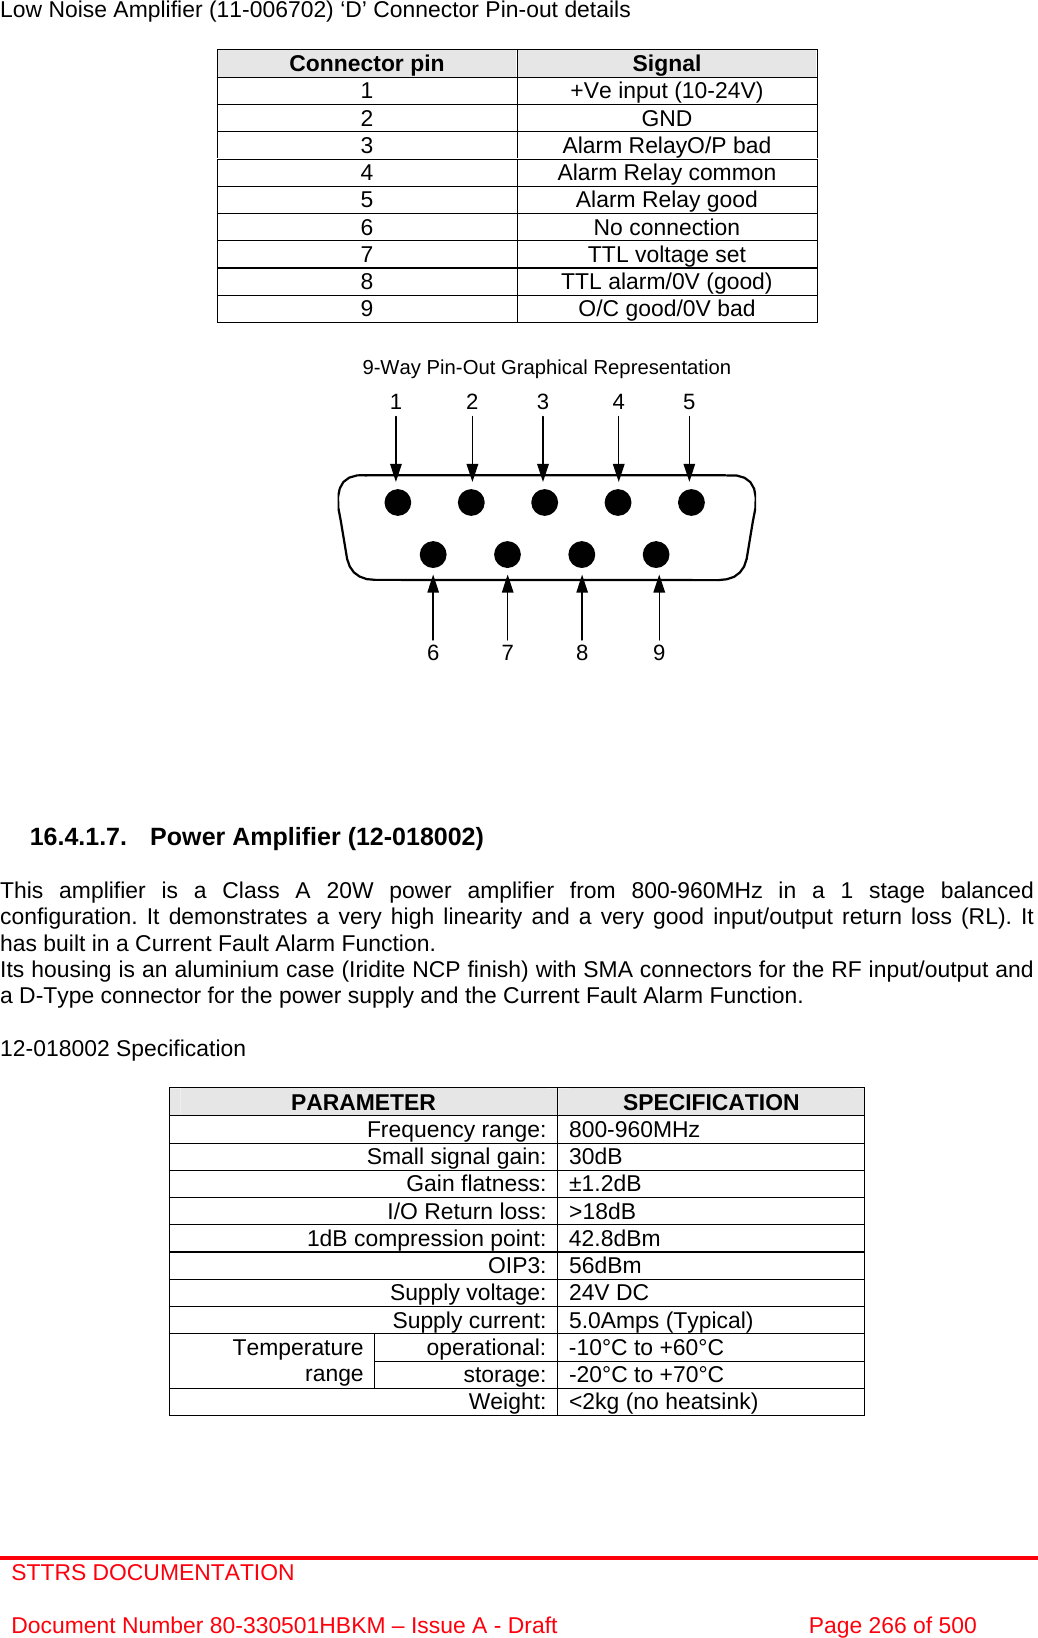 STTRS DOCUMENTATION  Document Number 80-330501HBKM – Issue A - Draft  Page 266 of 500  7 8 961 2 3 4 59-Way Pin-Out Graphical Representation Low Noise Amplifier (11-006702) ‘D’ Connector Pin-out details  Connector pin  Signal 1  +Ve input (10-24V) 2 GND 3  Alarm RelayO/P bad 4  Alarm Relay common 5  Alarm Relay good 6 No connection 7  TTL voltage set 8  TTL alarm/0V (good) 9  O/C good/0V bad                    16.4.1.7.  Power Amplifier (12-018002)  This amplifier is a Class A 20W power amplifier from 800-960MHz in a 1 stage balanced configuration. It demonstrates a very high linearity and a very good input/output return loss (RL). It has built in a Current Fault Alarm Function. Its housing is an aluminium case (Iridite NCP finish) with SMA connectors for the RF input/output and a D-Type connector for the power supply and the Current Fault Alarm Function.  12-018002 Specification  PARAMETER  SPECIFICATION Frequency range: 800-960MHz Small signal gain: 30dB Gain flatness: ±1.2dB I/O Return loss: &gt;18dB 1dB compression point: 42.8dBm OIP3: 56dBm Supply voltage: 24V DC Supply current: 5.0Amps (Typical) operational: -10°C to +60°C Temperature range  storage: -20°C to +70°C Weight: &lt;2kg (no heatsink)  